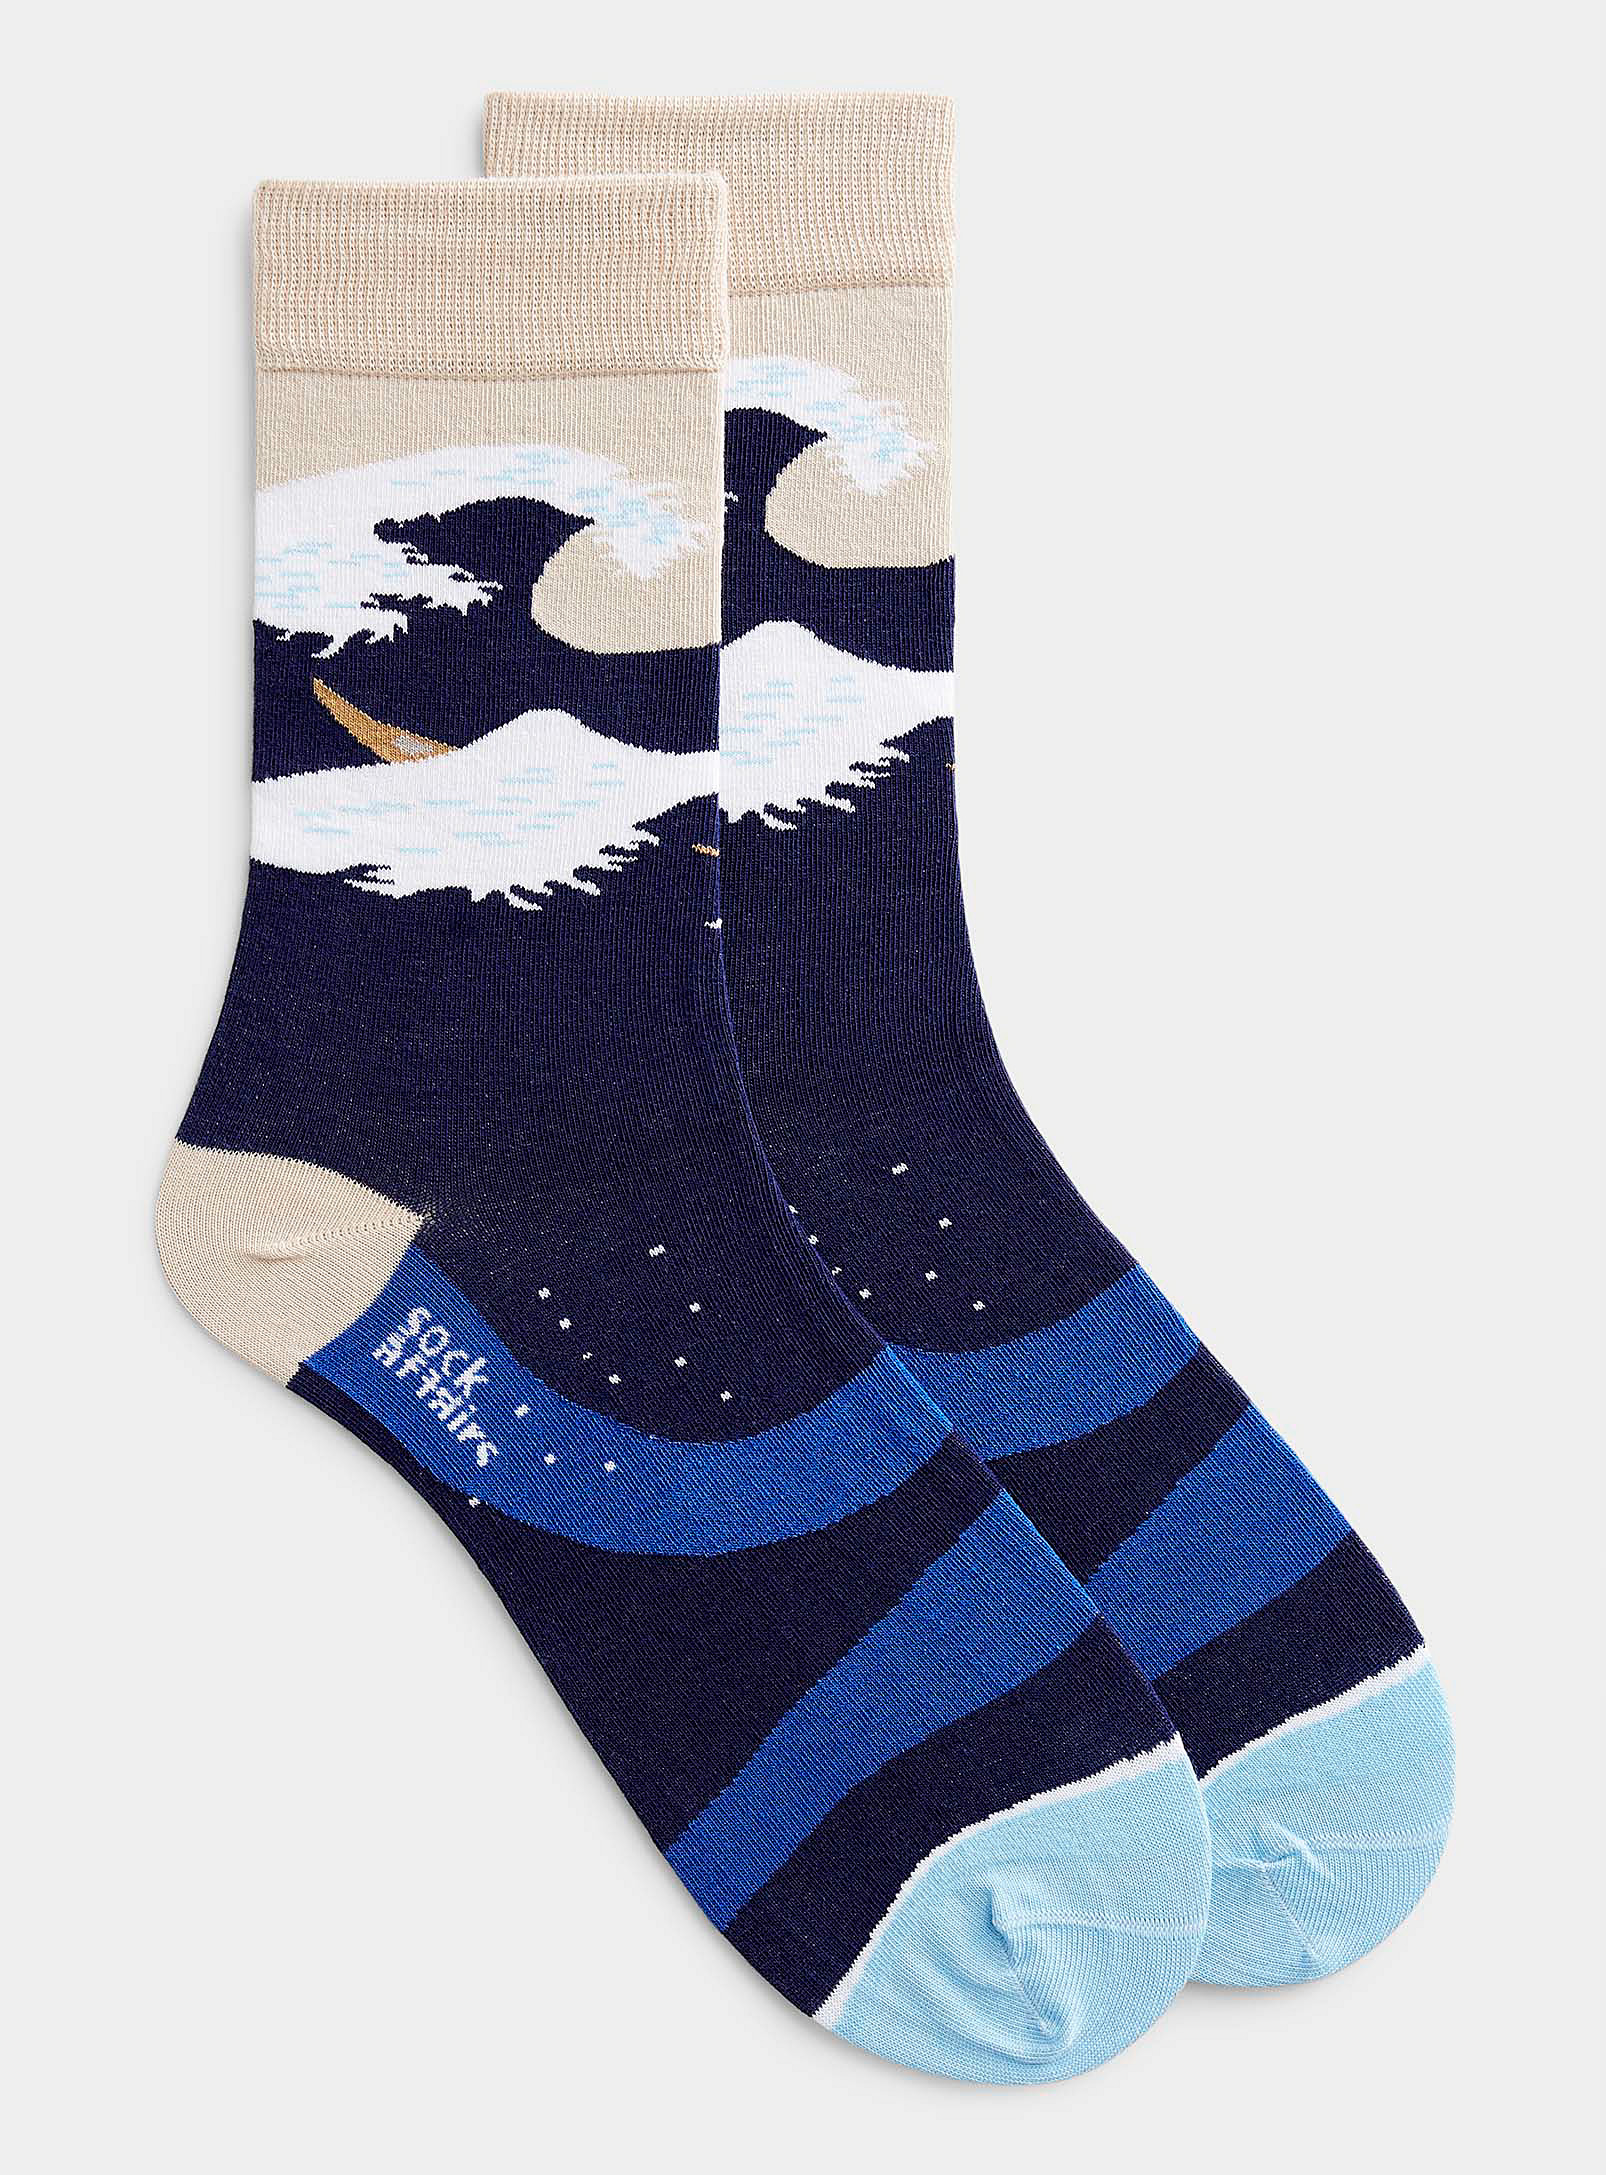 Sock Affairs Great Wave Sock In Patterned Blue